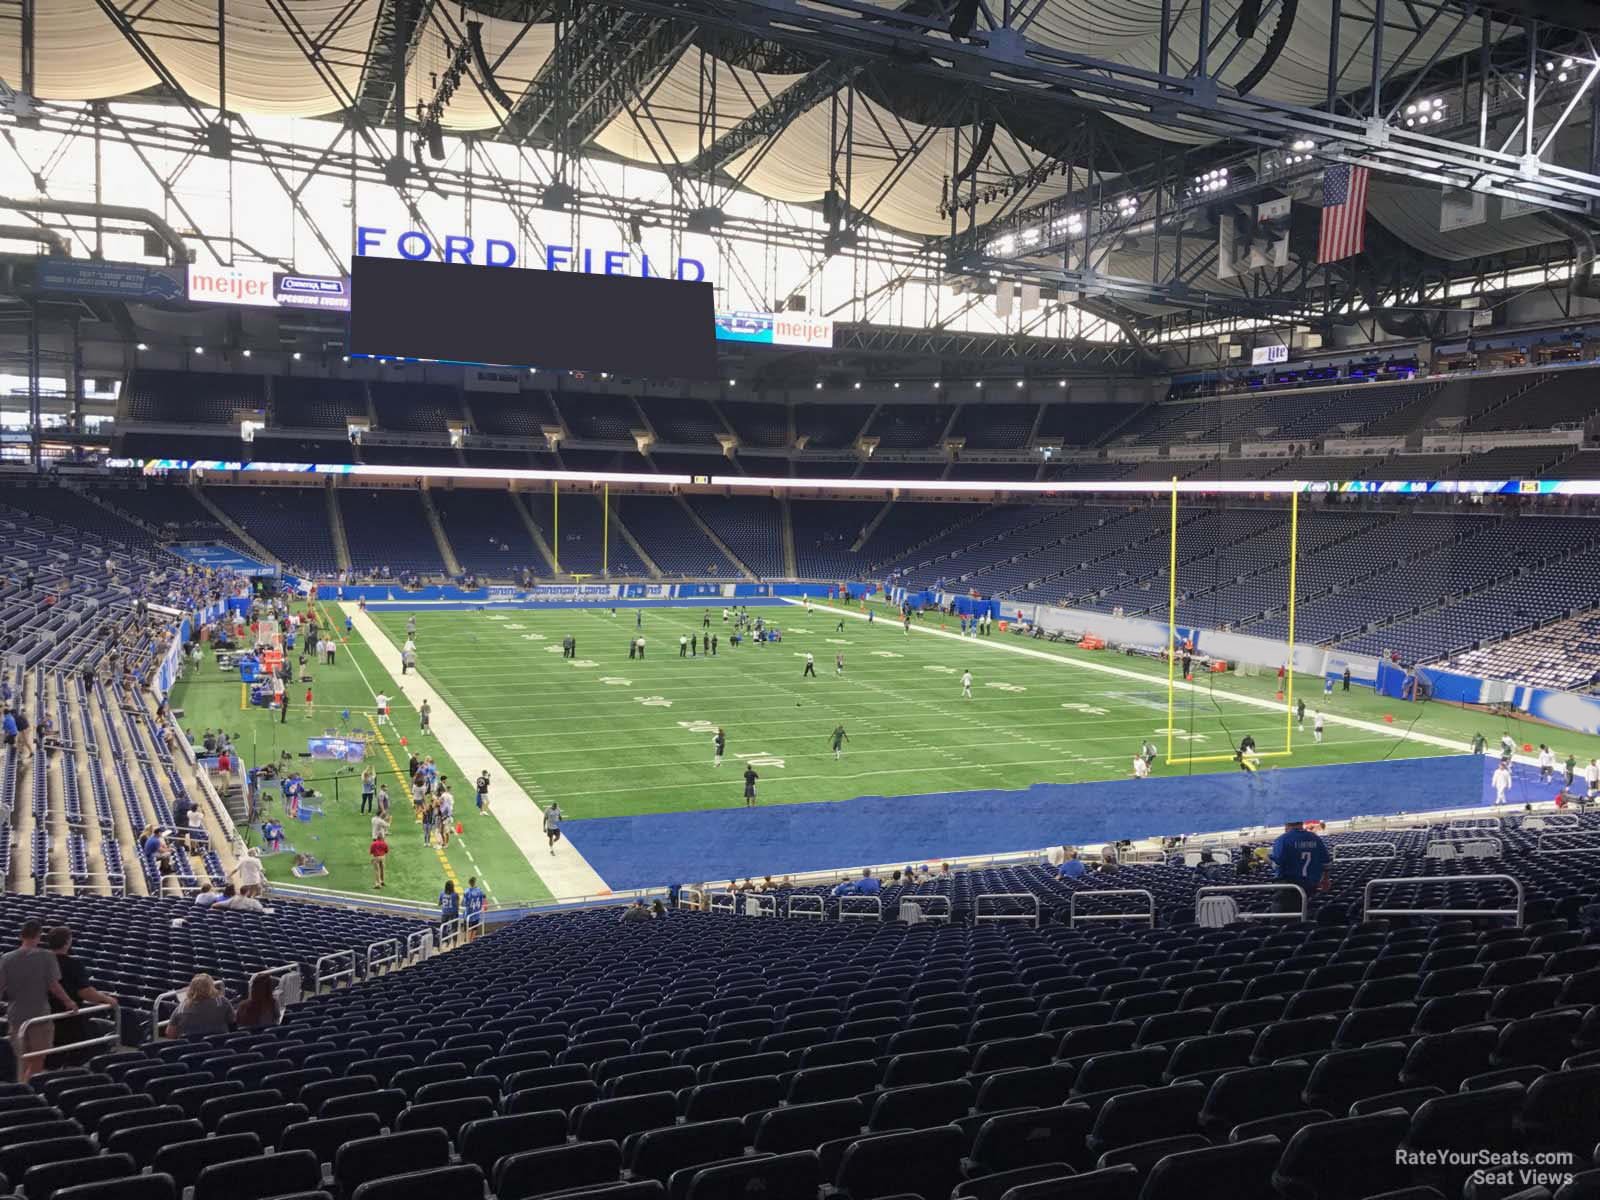 section 114, row 33 seat view  for football - ford field